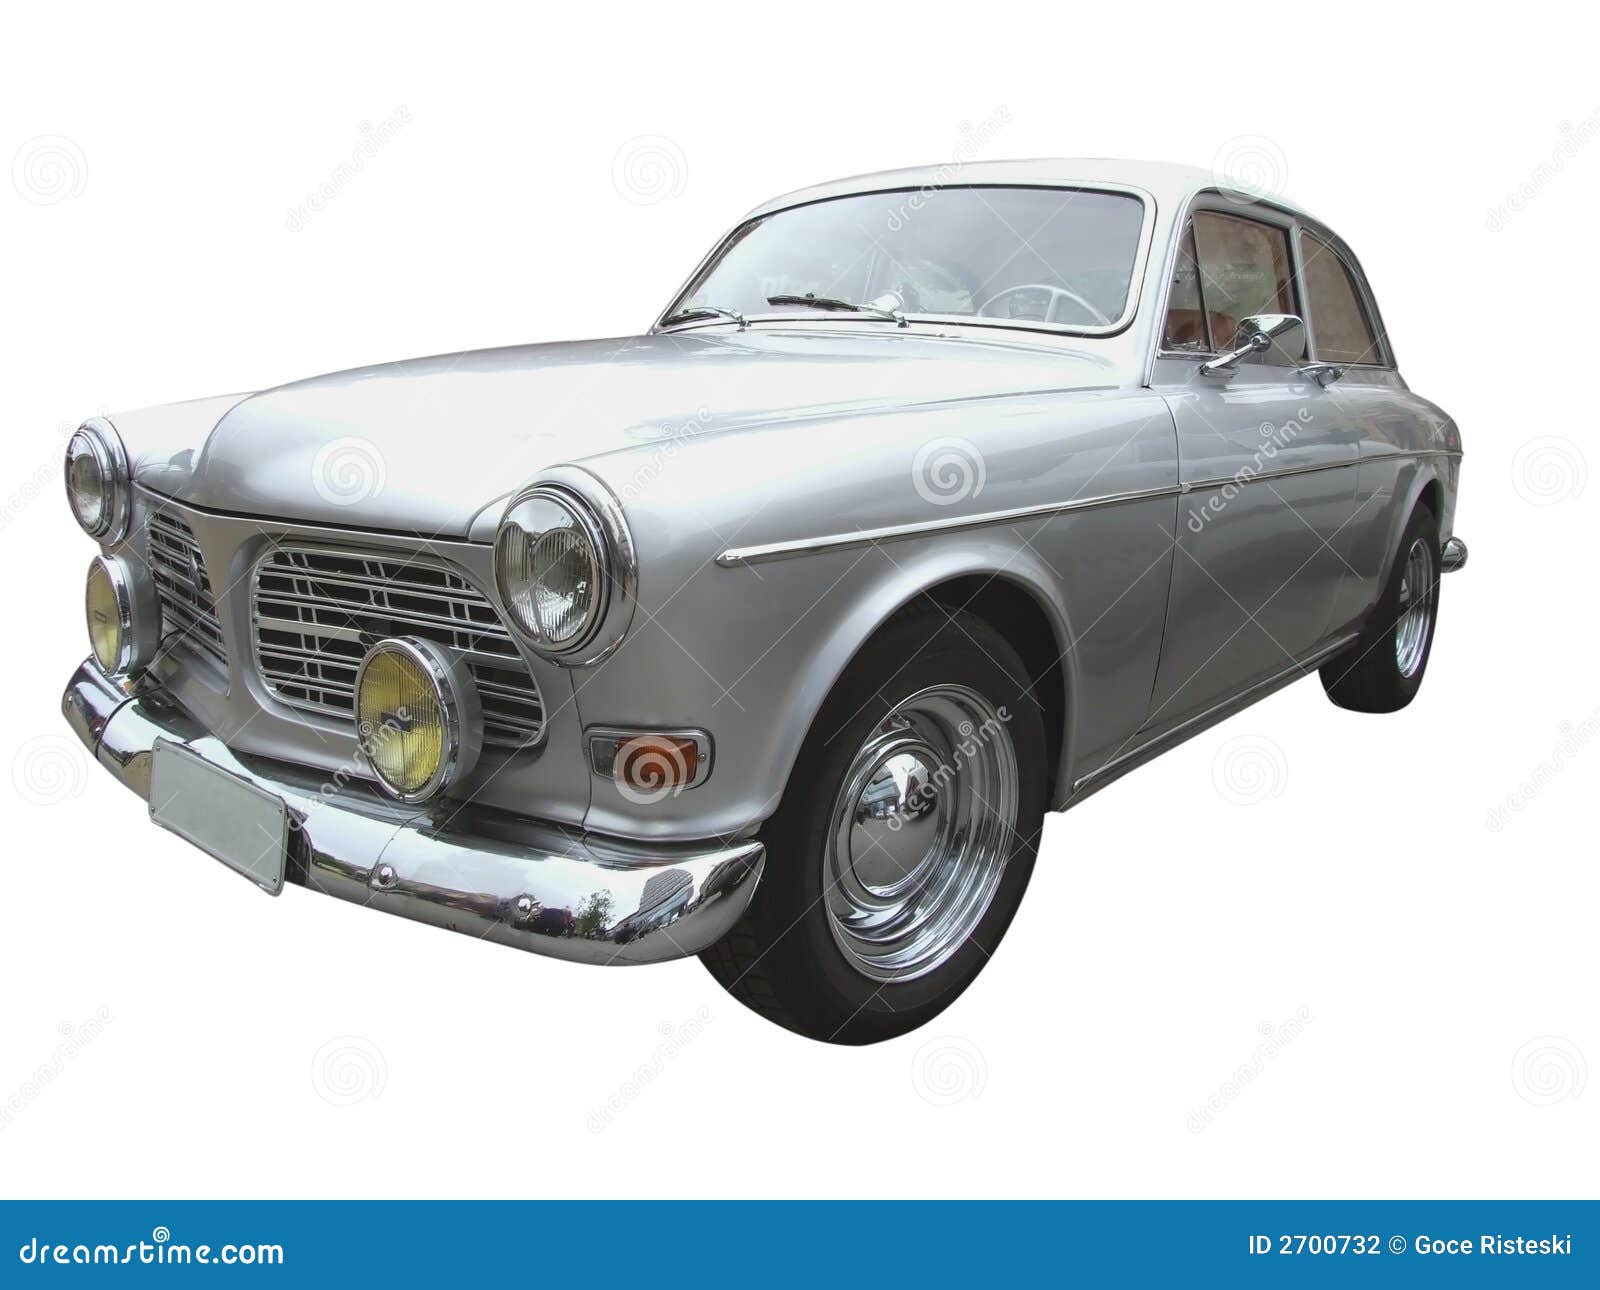 49,987 Oldtimer Car Photos - Free & Royalty-Free Stock Photos from  Dreamstime